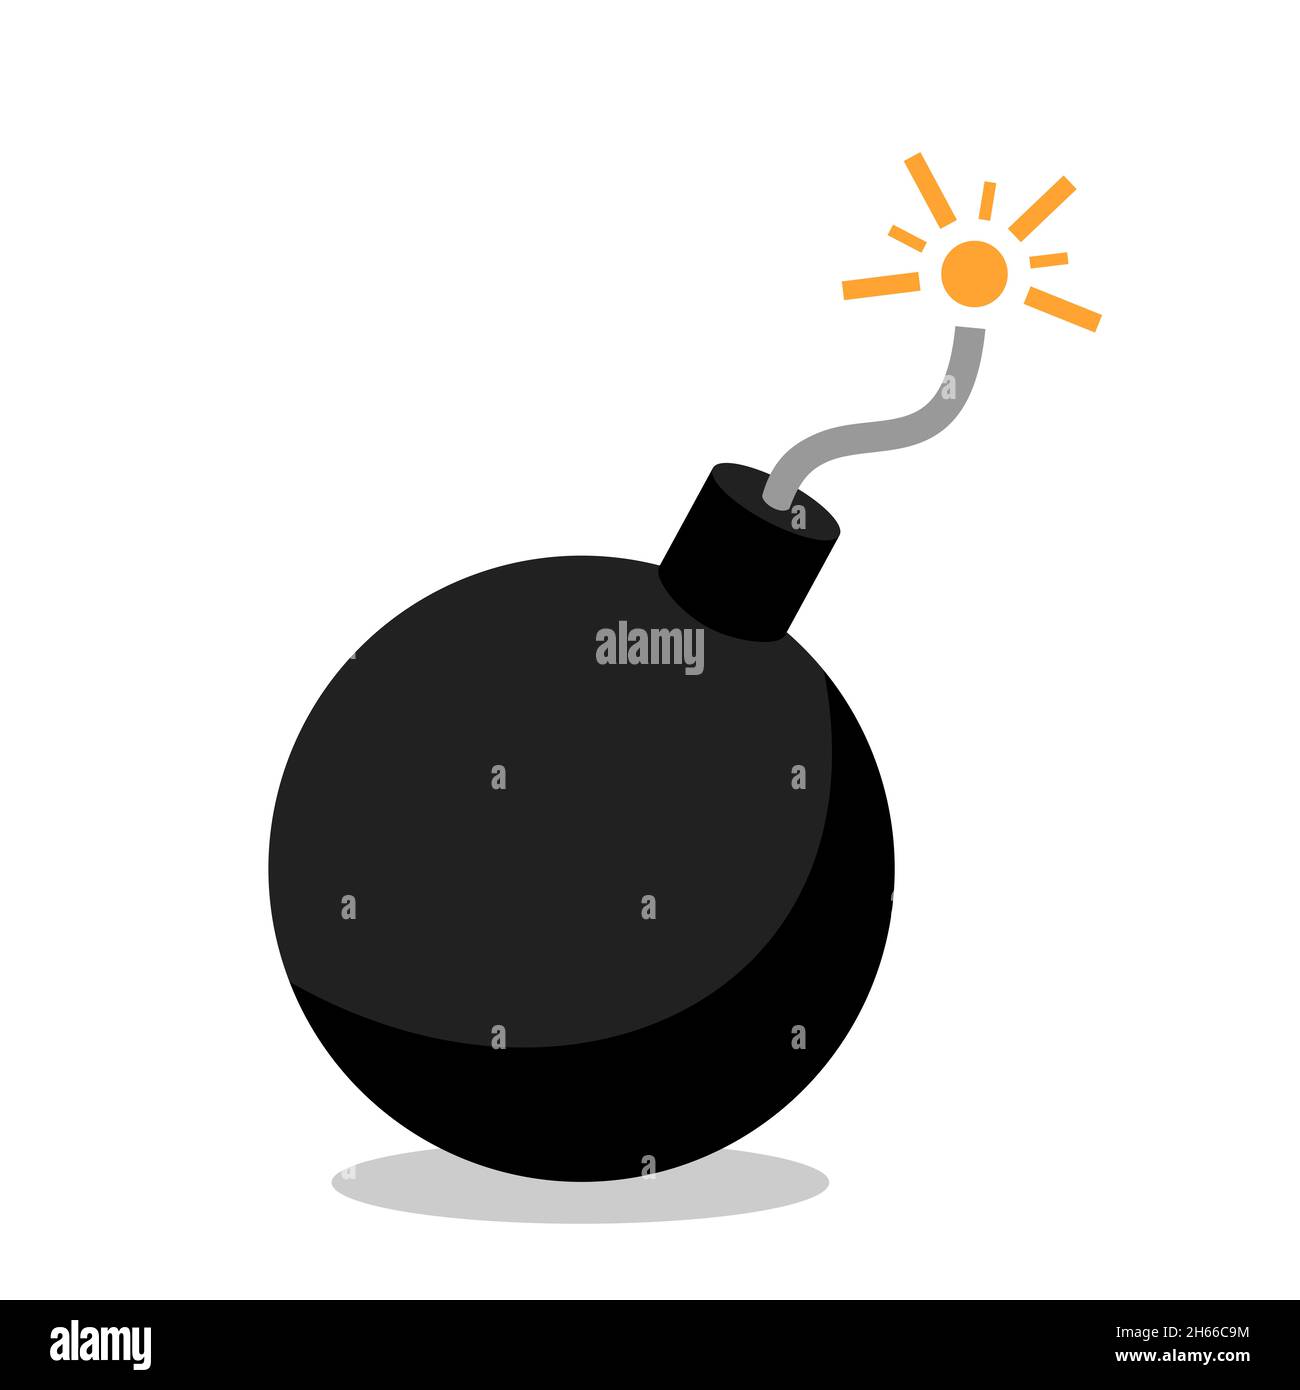 Old styled time bomb is going to explode and detonate anfter countdown. Dangerous explosive weapon. Vector illustration isolated on white. Stock Photo